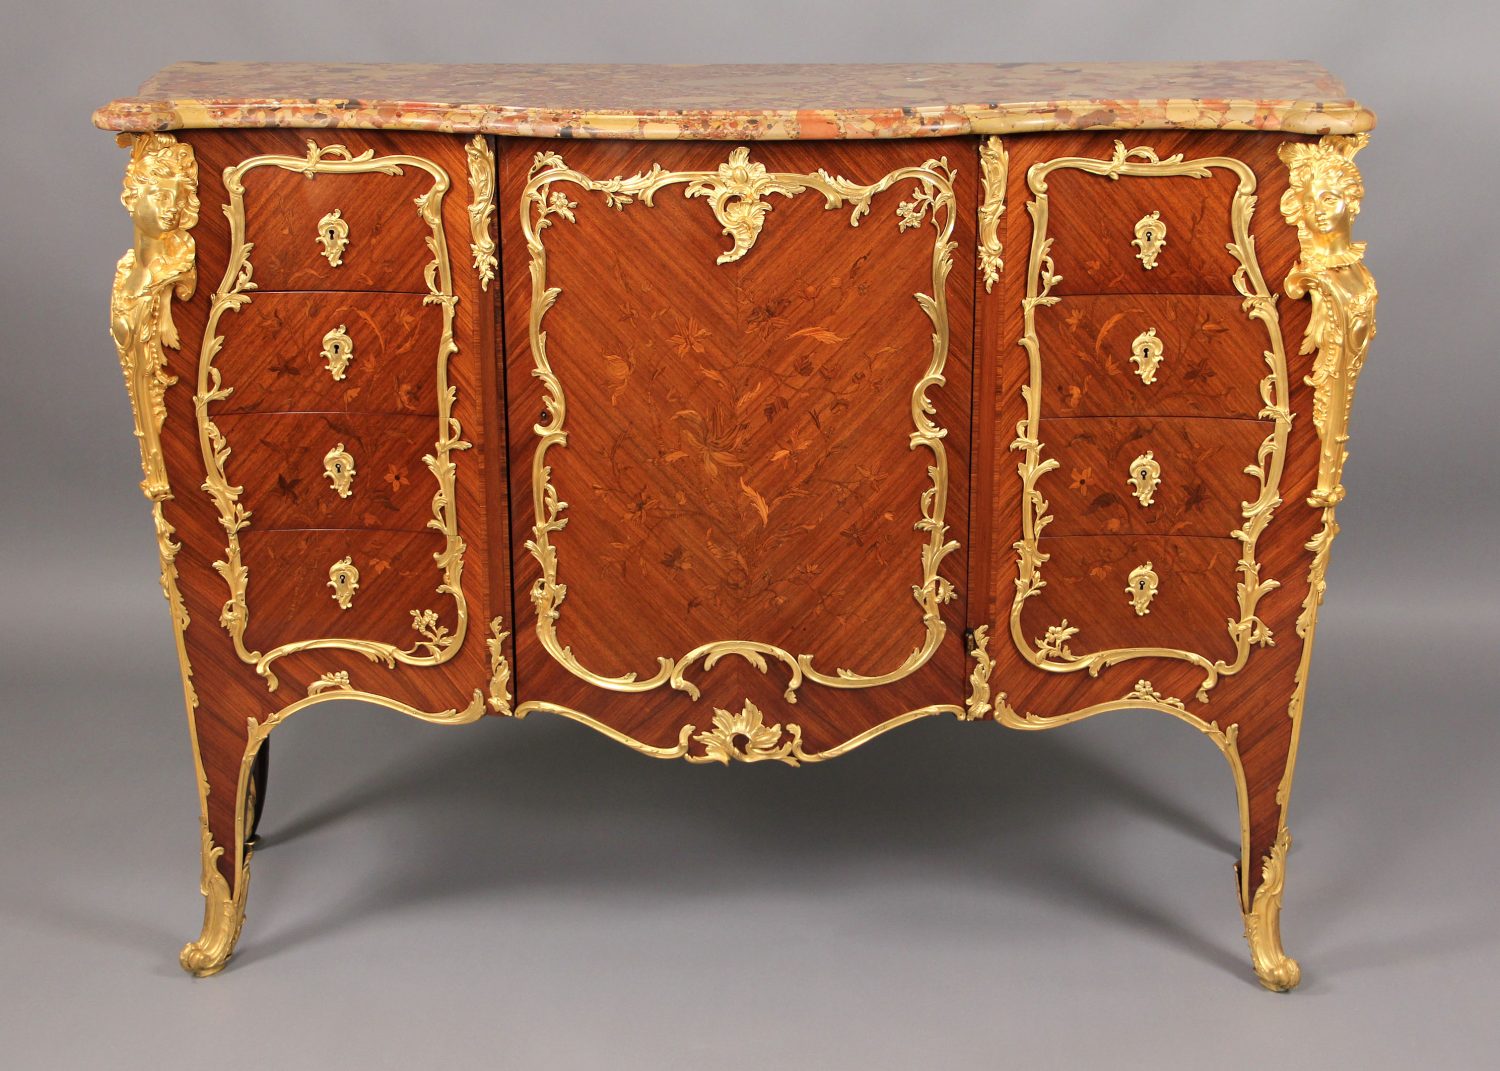 Gilt bronze mounted hand cut floral cabinet